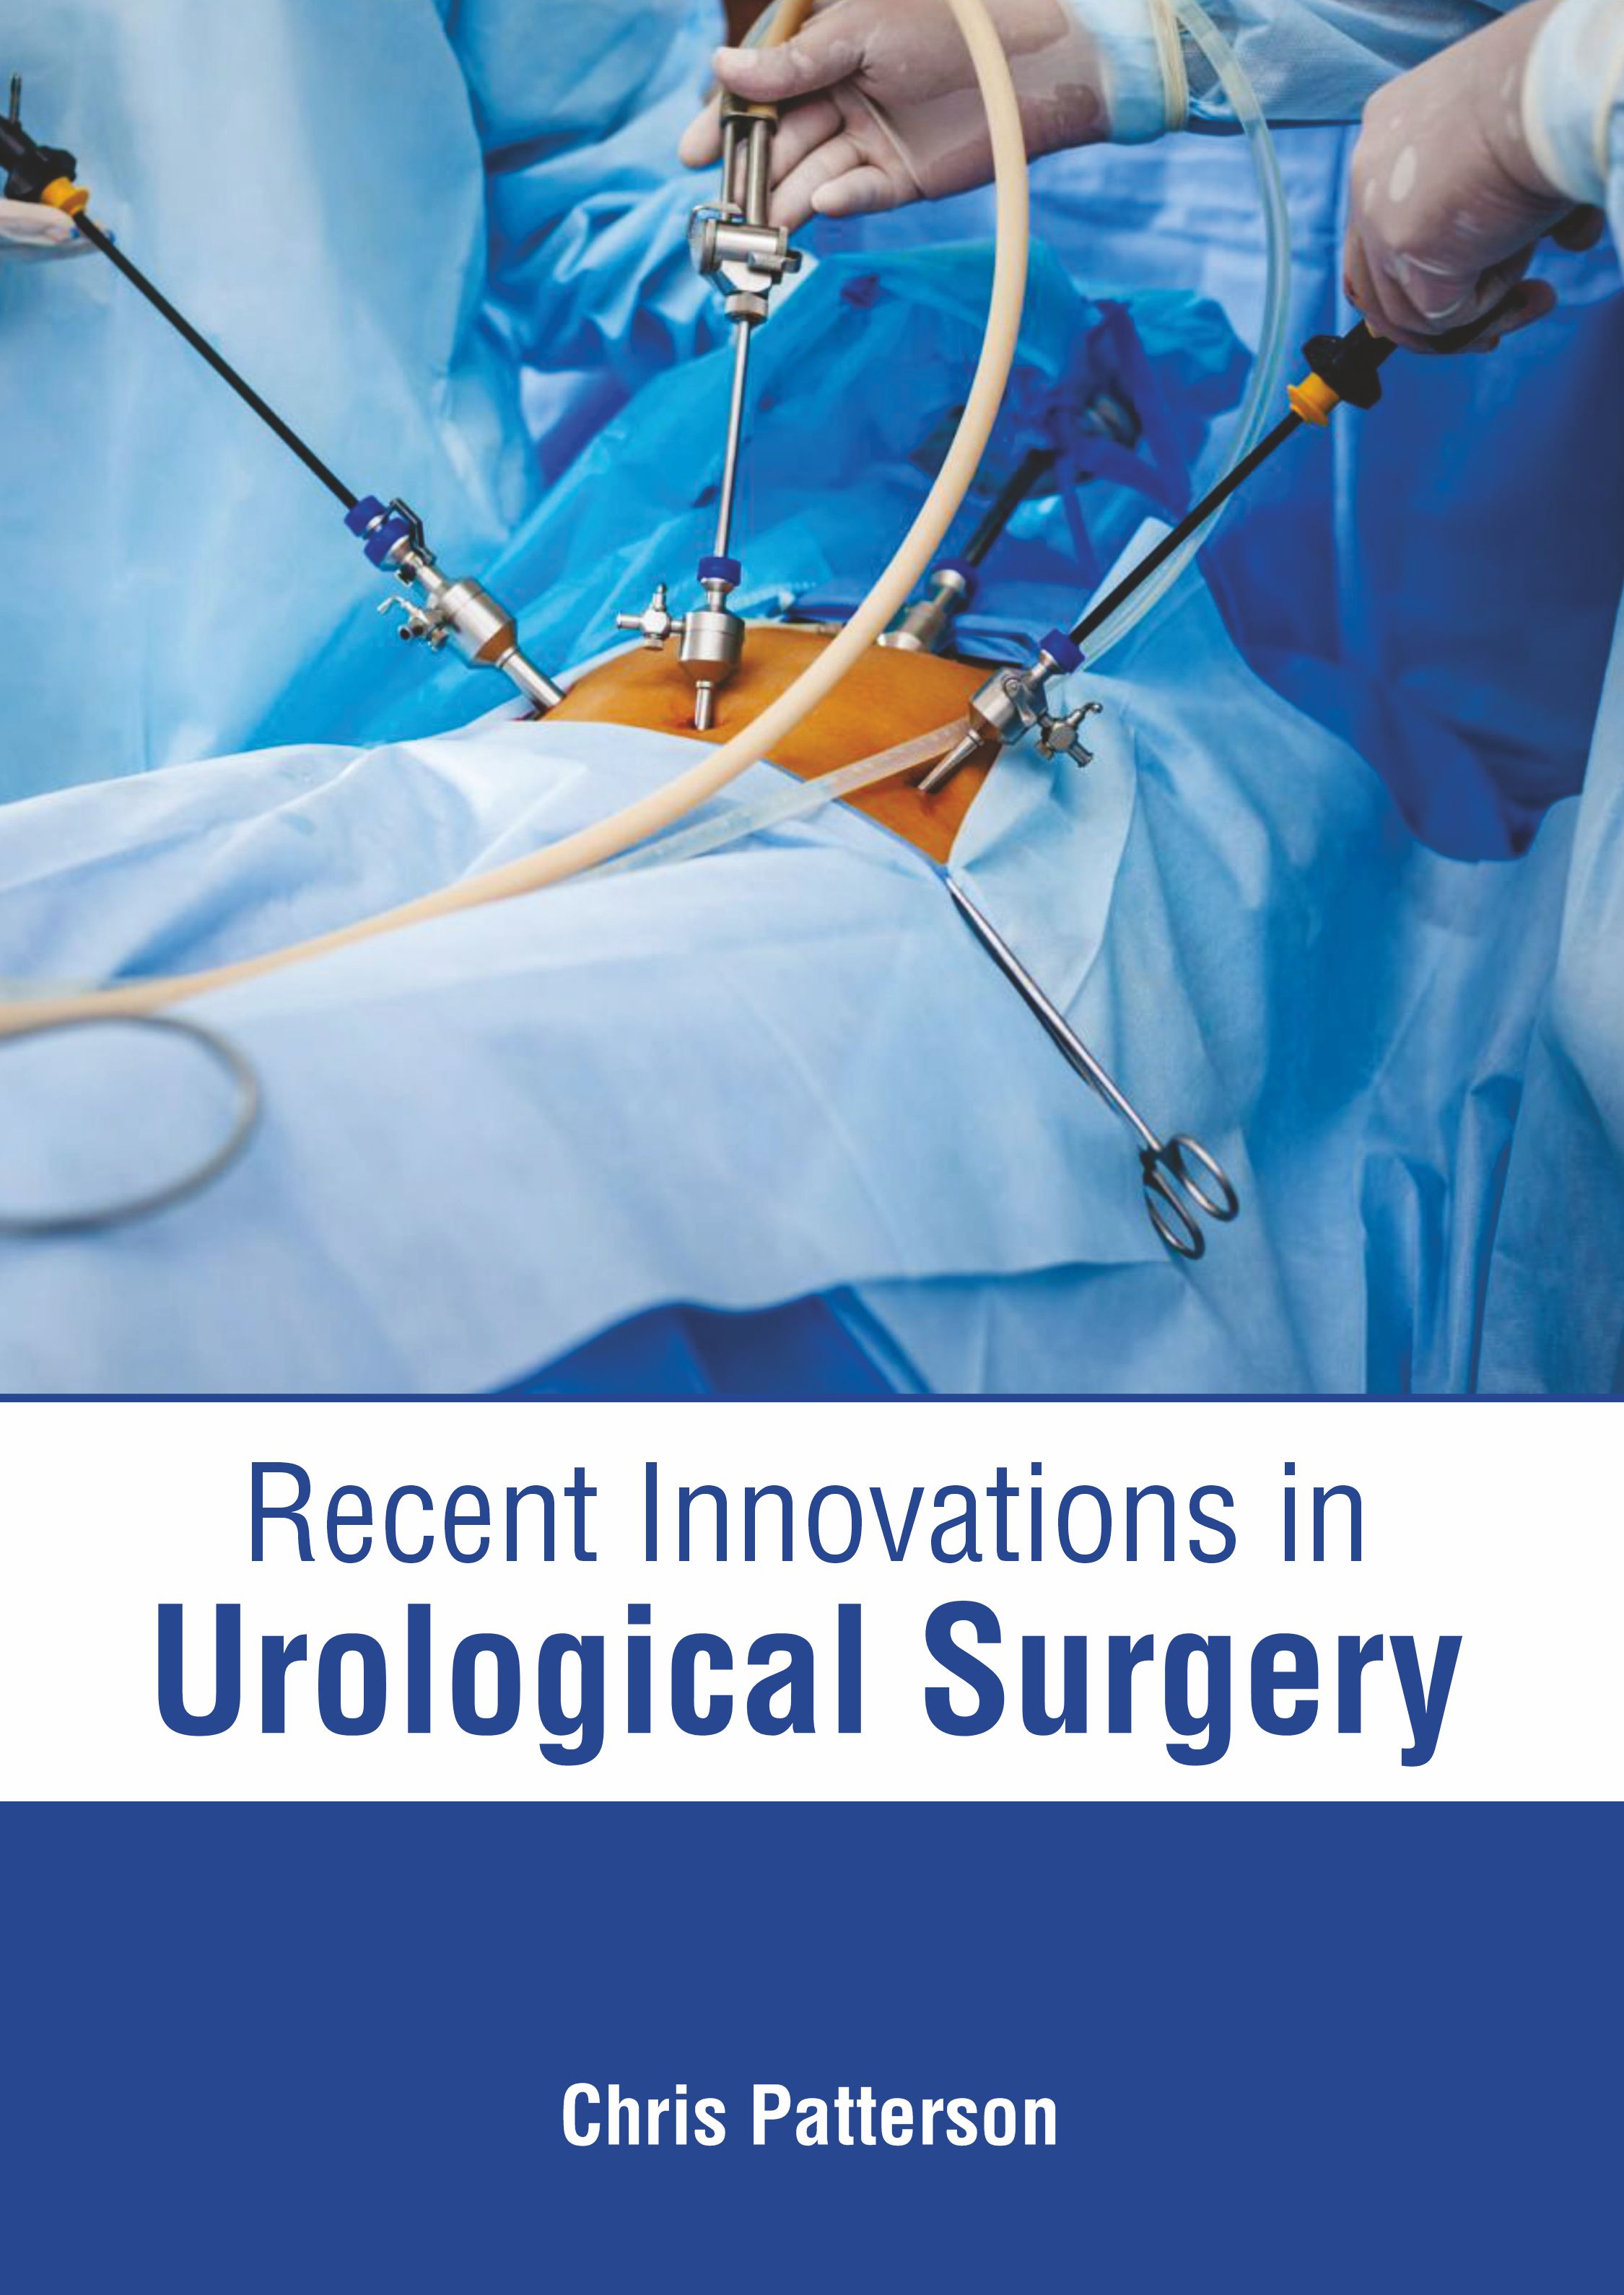 

exclusive-publishers/american-medical-publishers/recent-innovations-in-urological-surgery-9781639274970